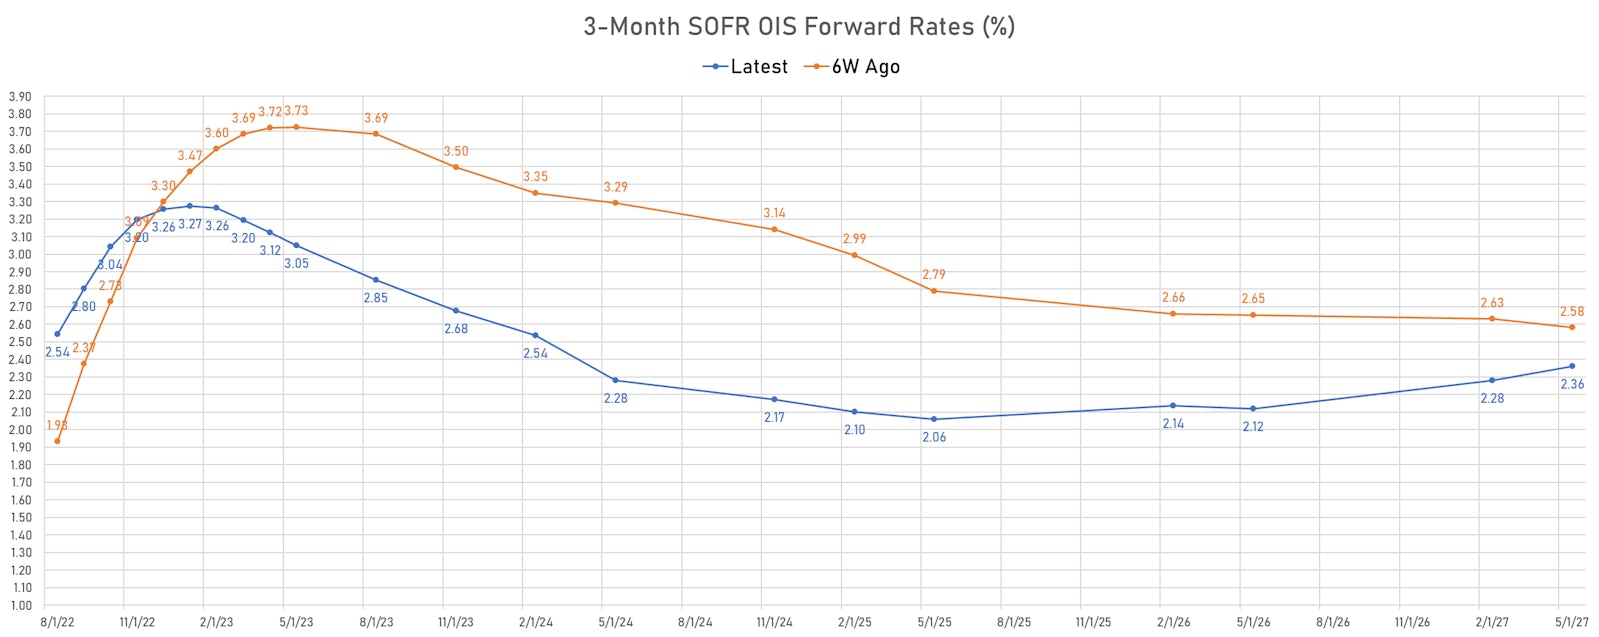 3-Month USD SOFR OIS Forward Rates Curve | Sources: ϕpost, Refinitiv data 